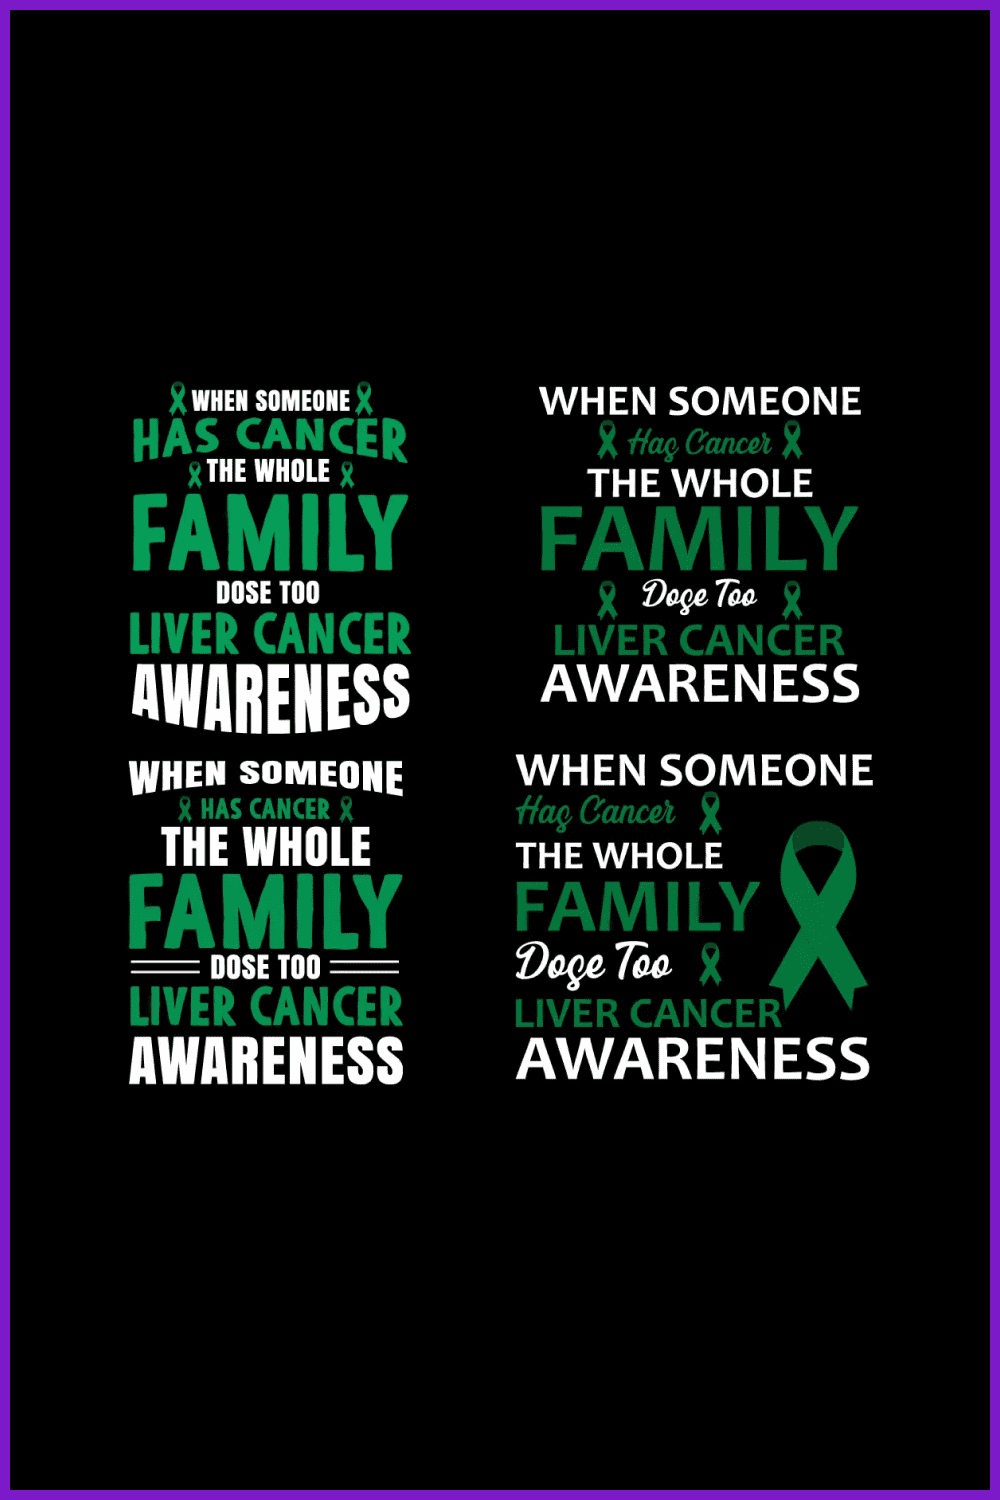 White and green text in different sizes on a black background.